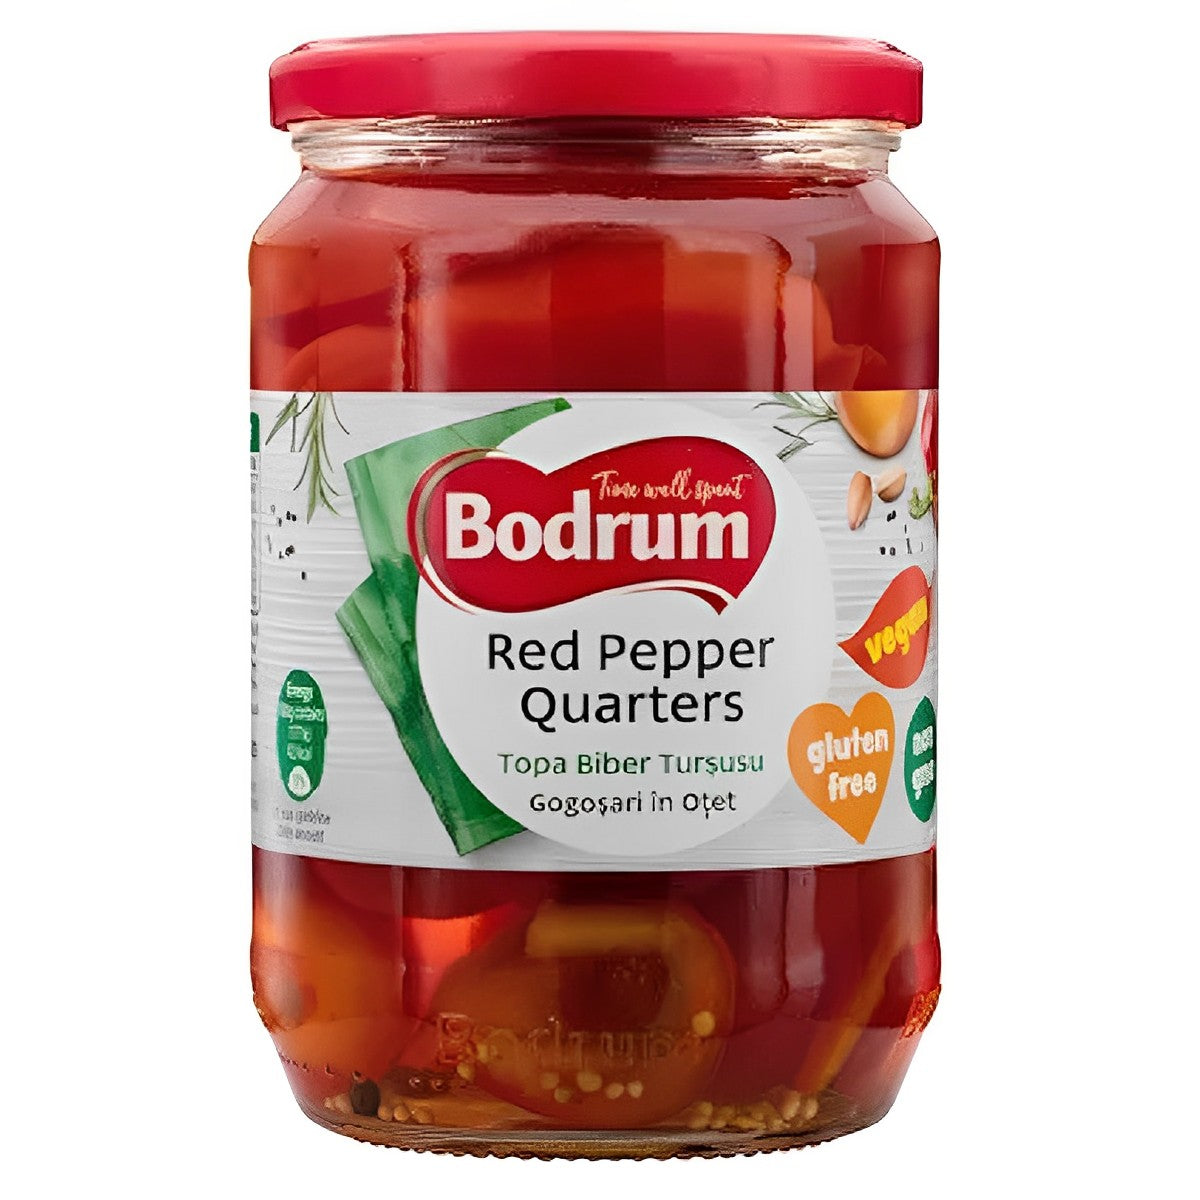 Bodrum - Red Pepper Quarters - 620g - Continental Food Store